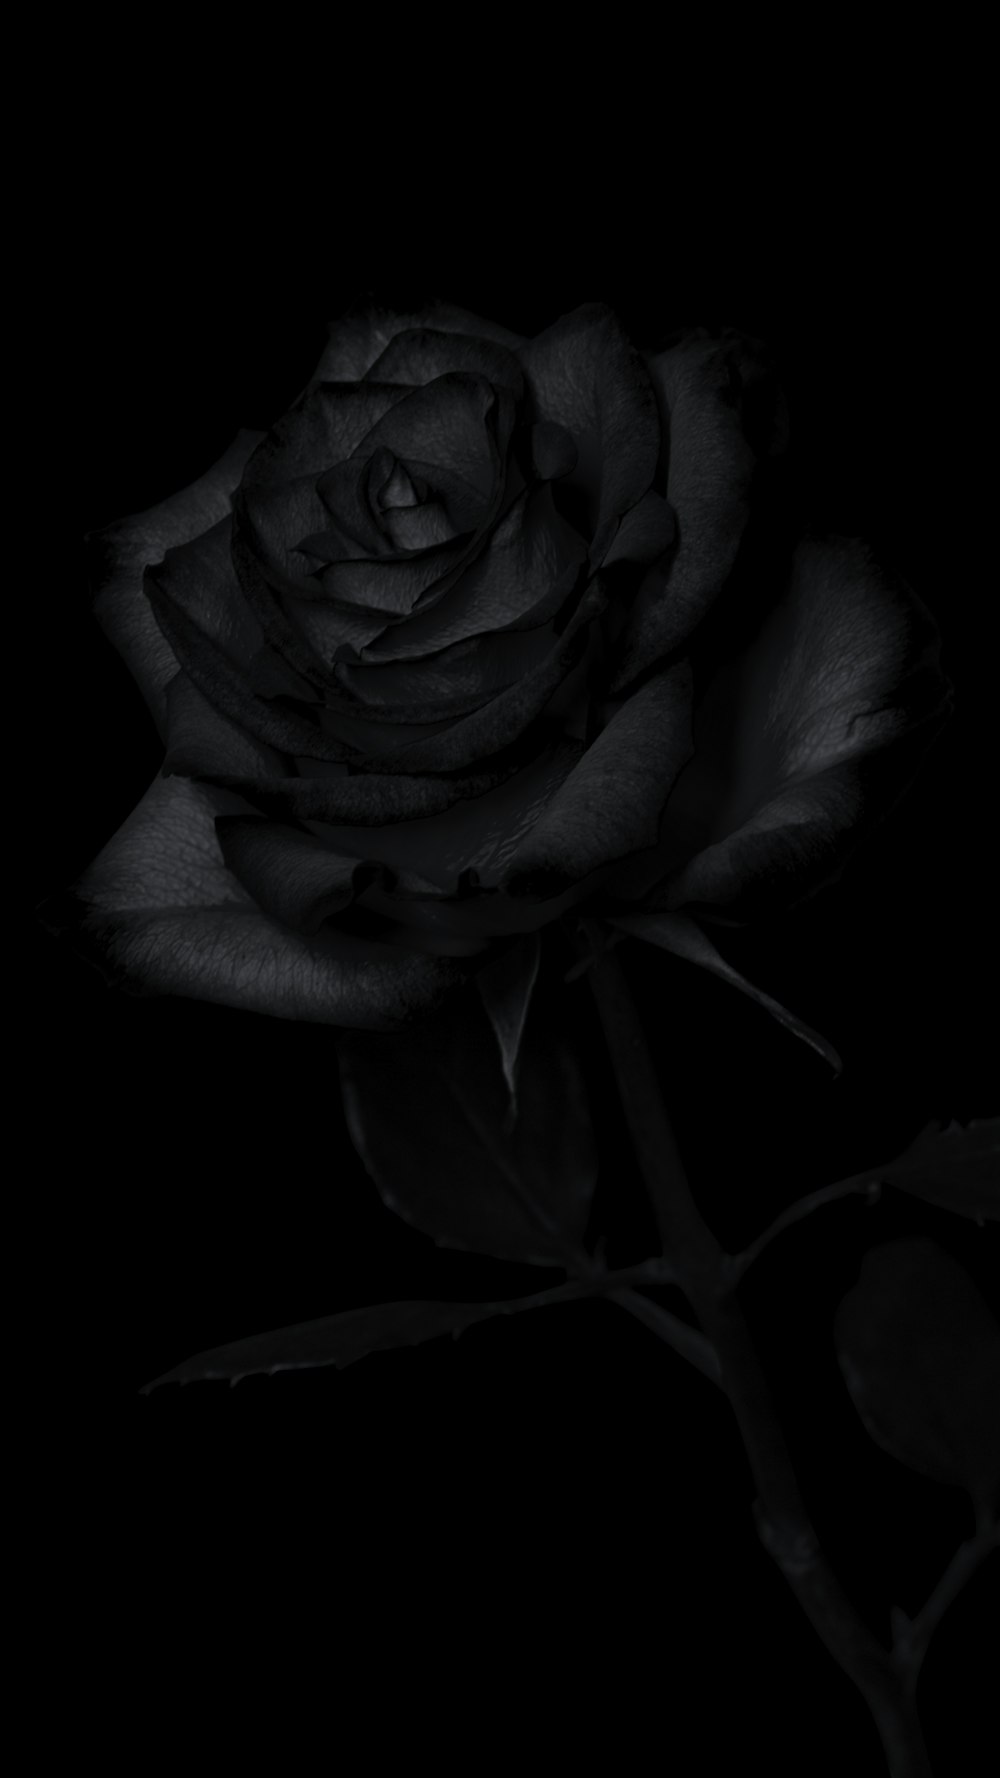 1000+ Black And White Rose Pictures | Download Free Images on Unsplash